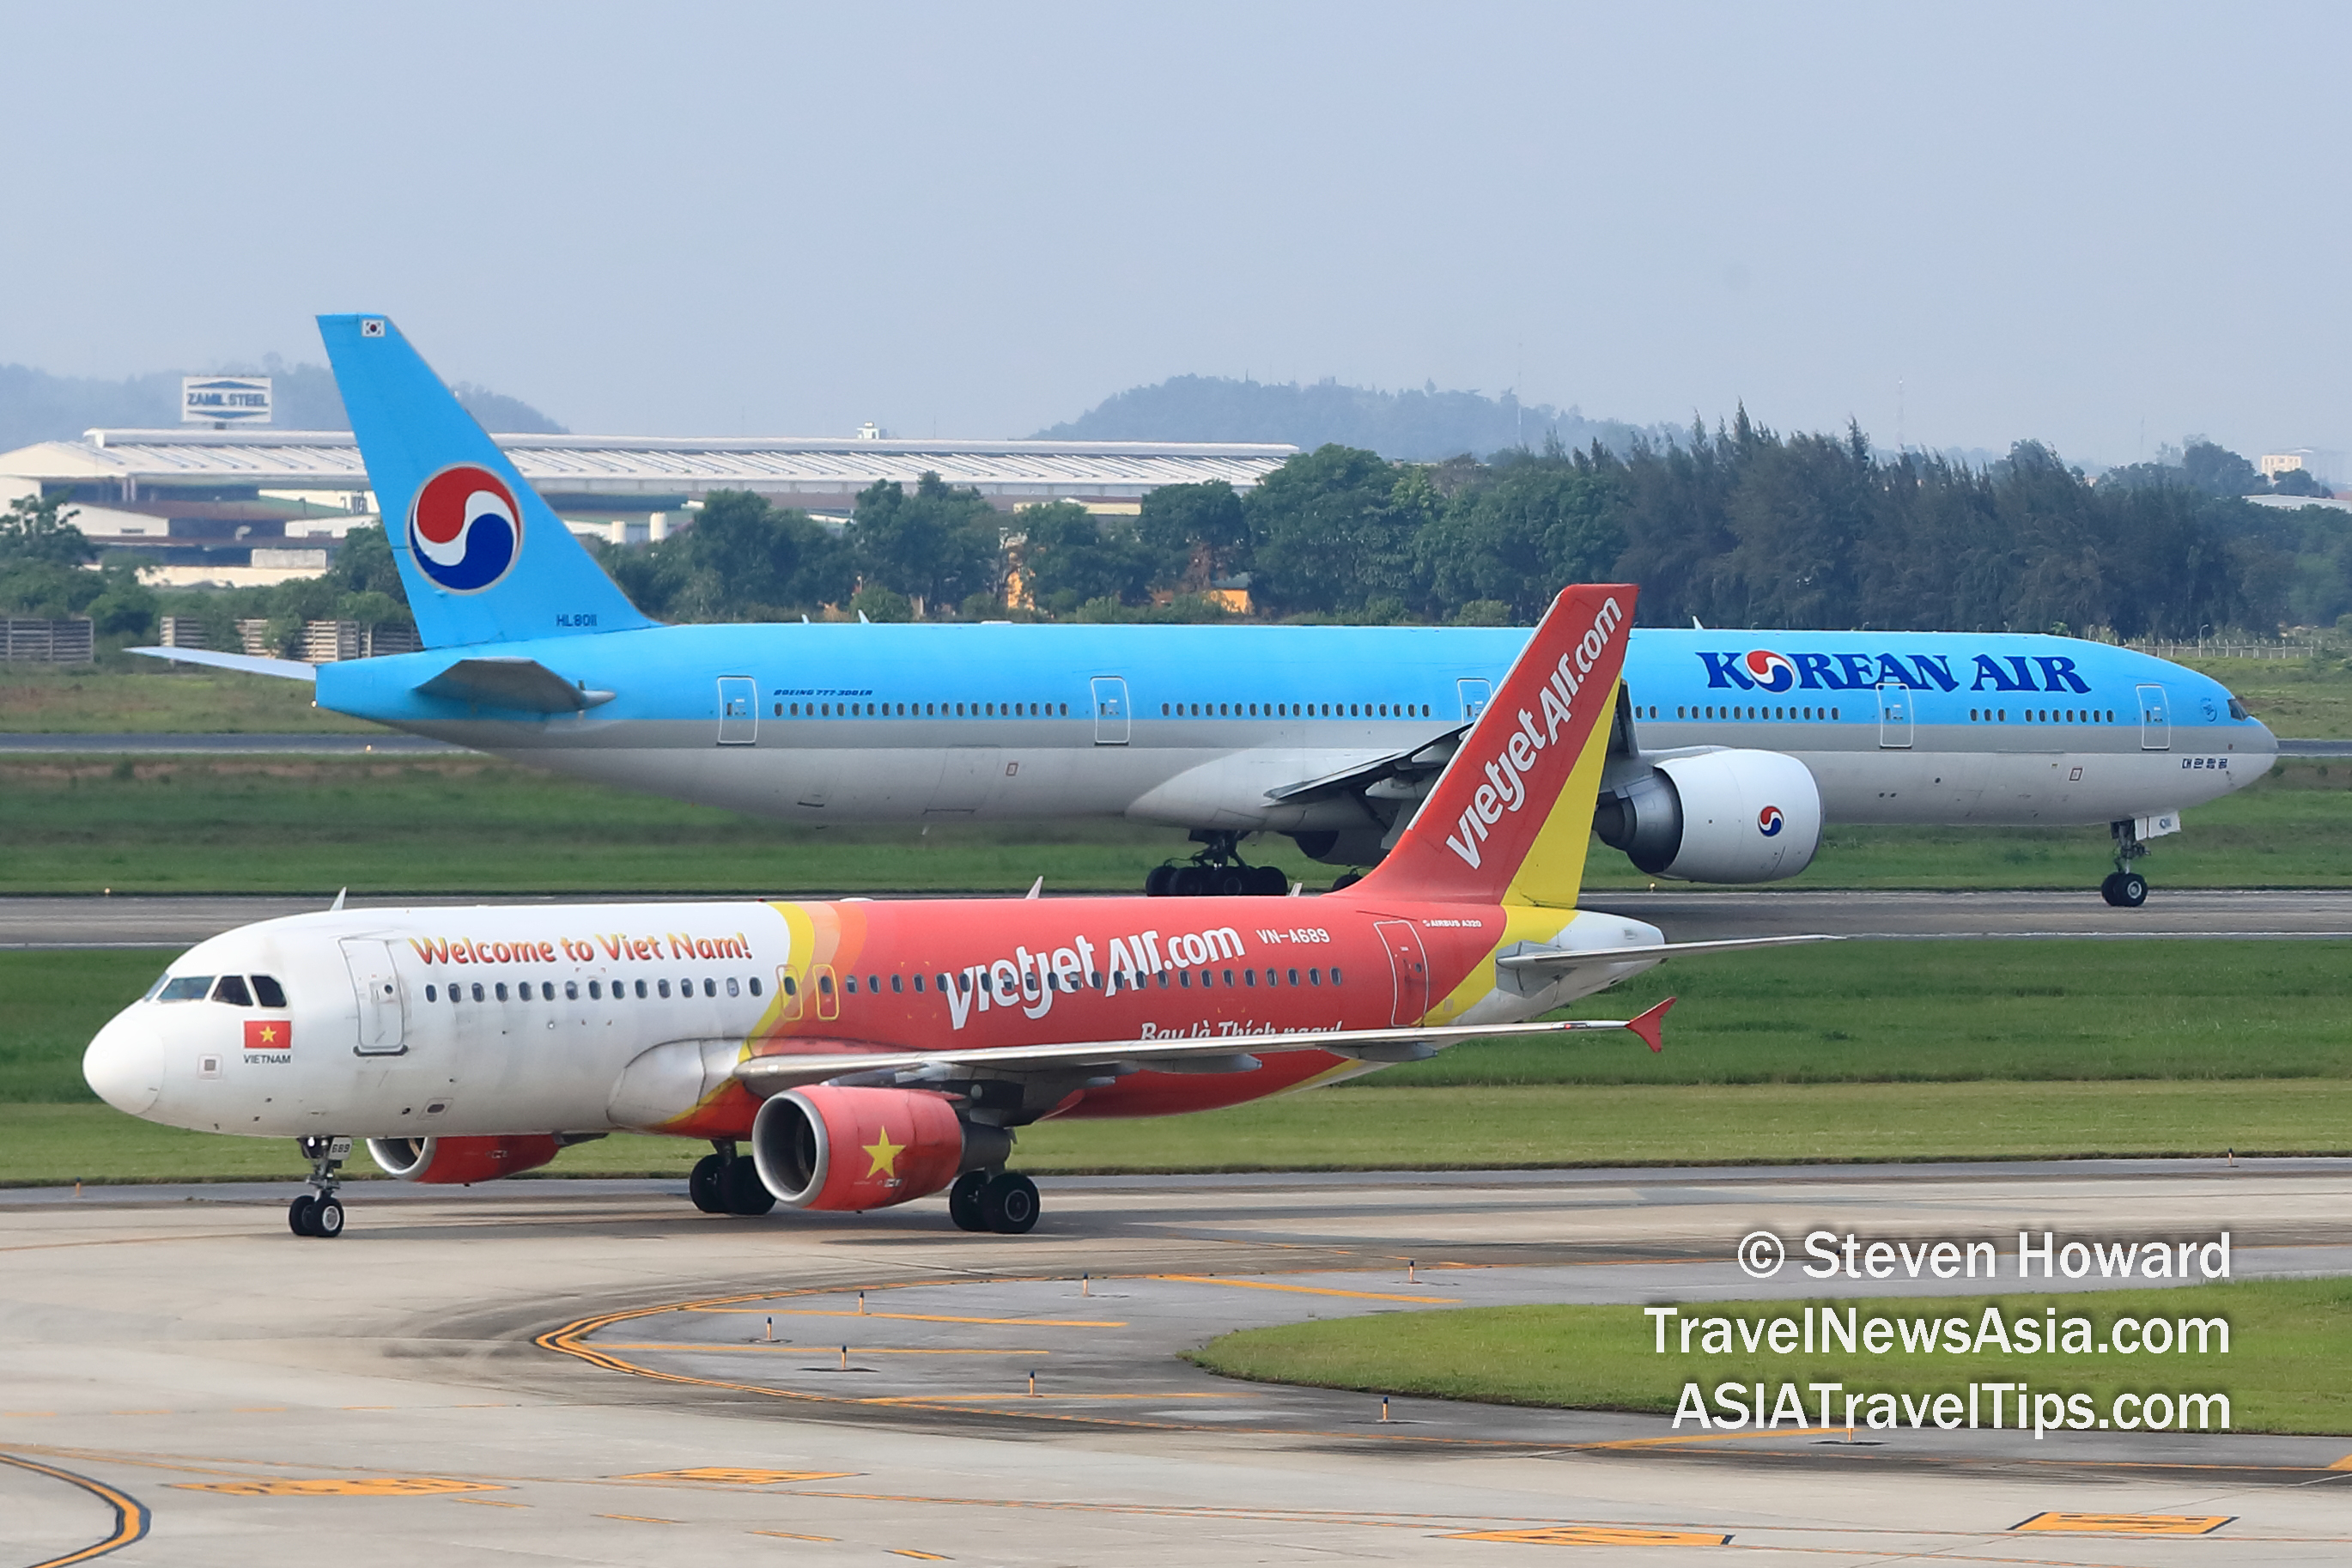 Vietjet Airbus A320 reg: VN-A689 in the foreground with Korean Air Boeing 777-300 reg: HL8011 in the background. Picture by Steven Howard of TravelNewsAsia.com Click to enlarge.